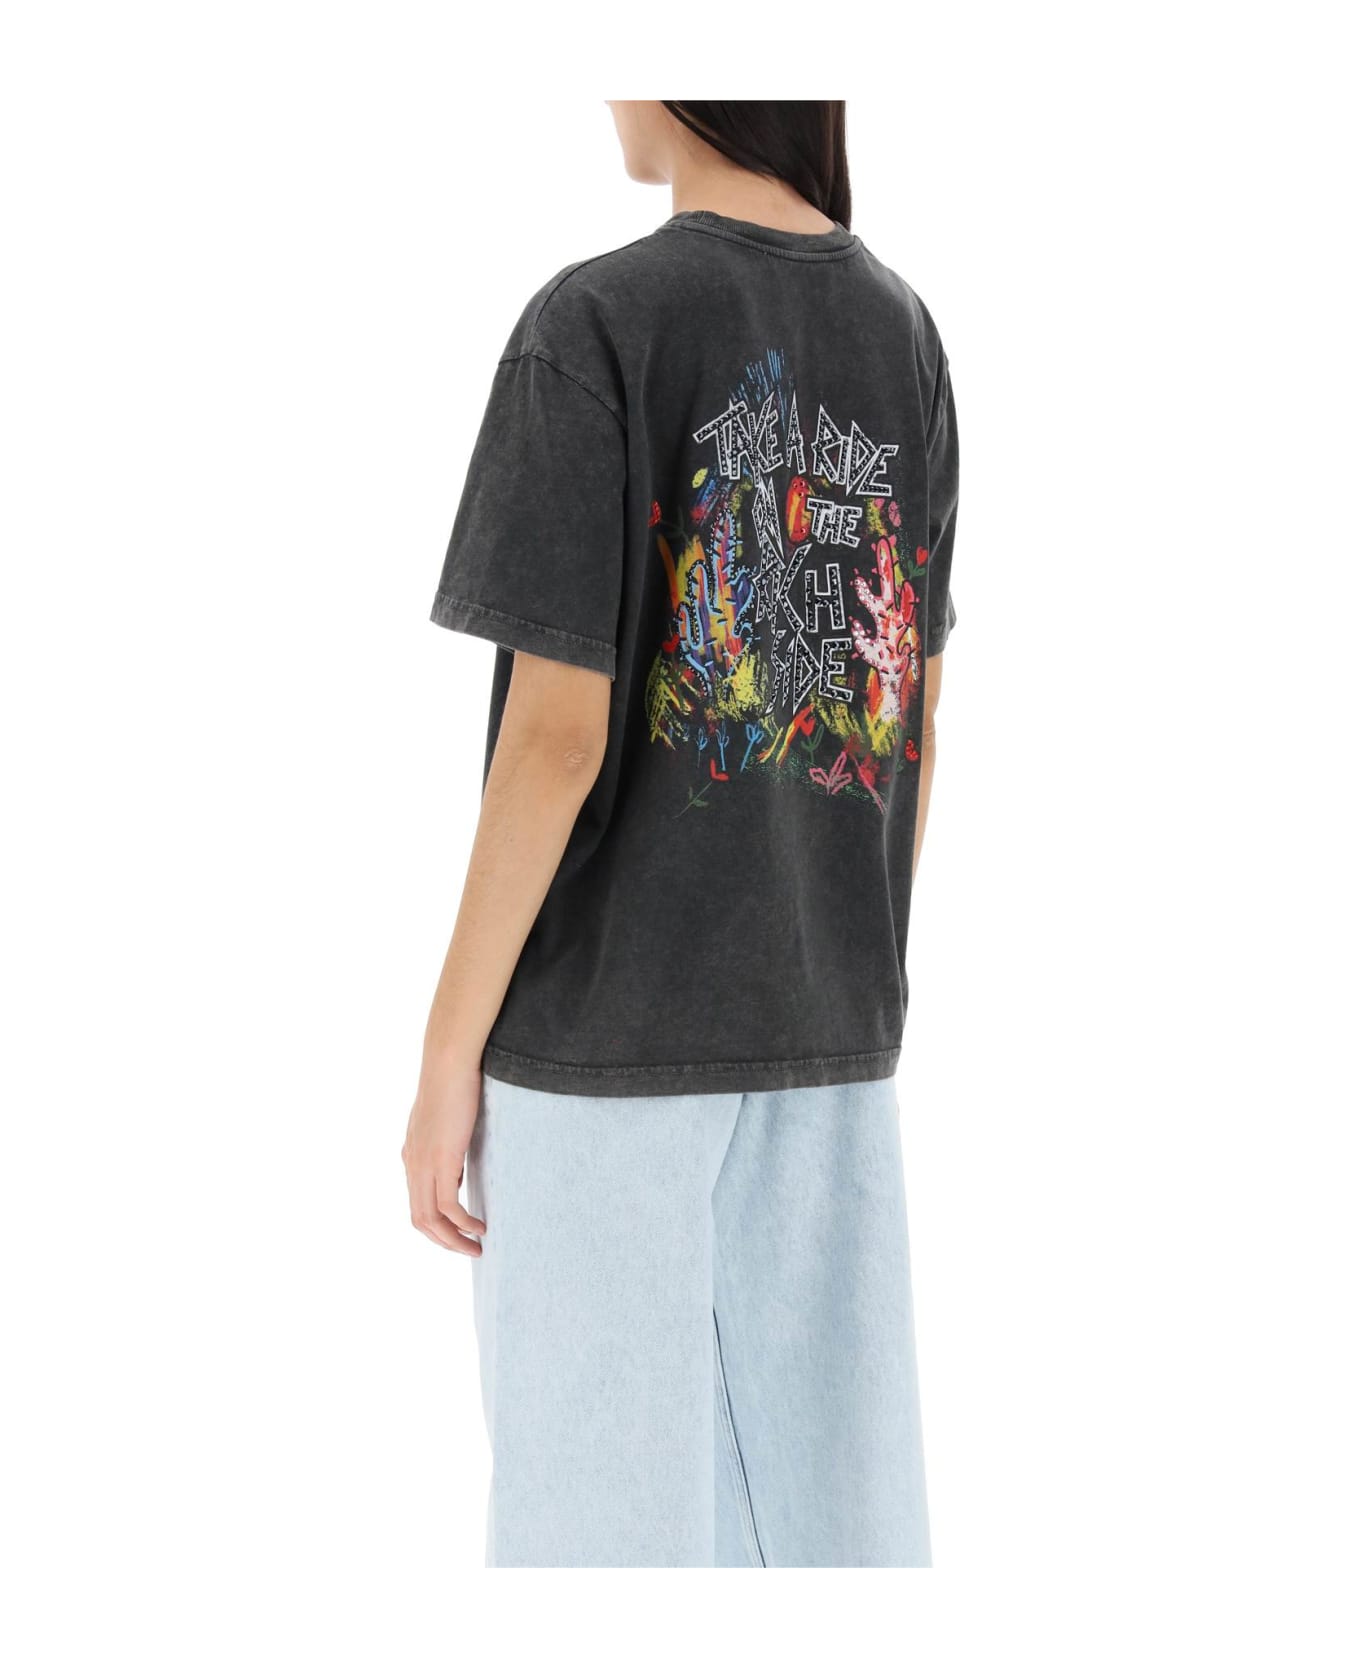 Alessandra Rich Oversized T-shirt With Print And Rhinestones - GREY (Grey) Tシャツ